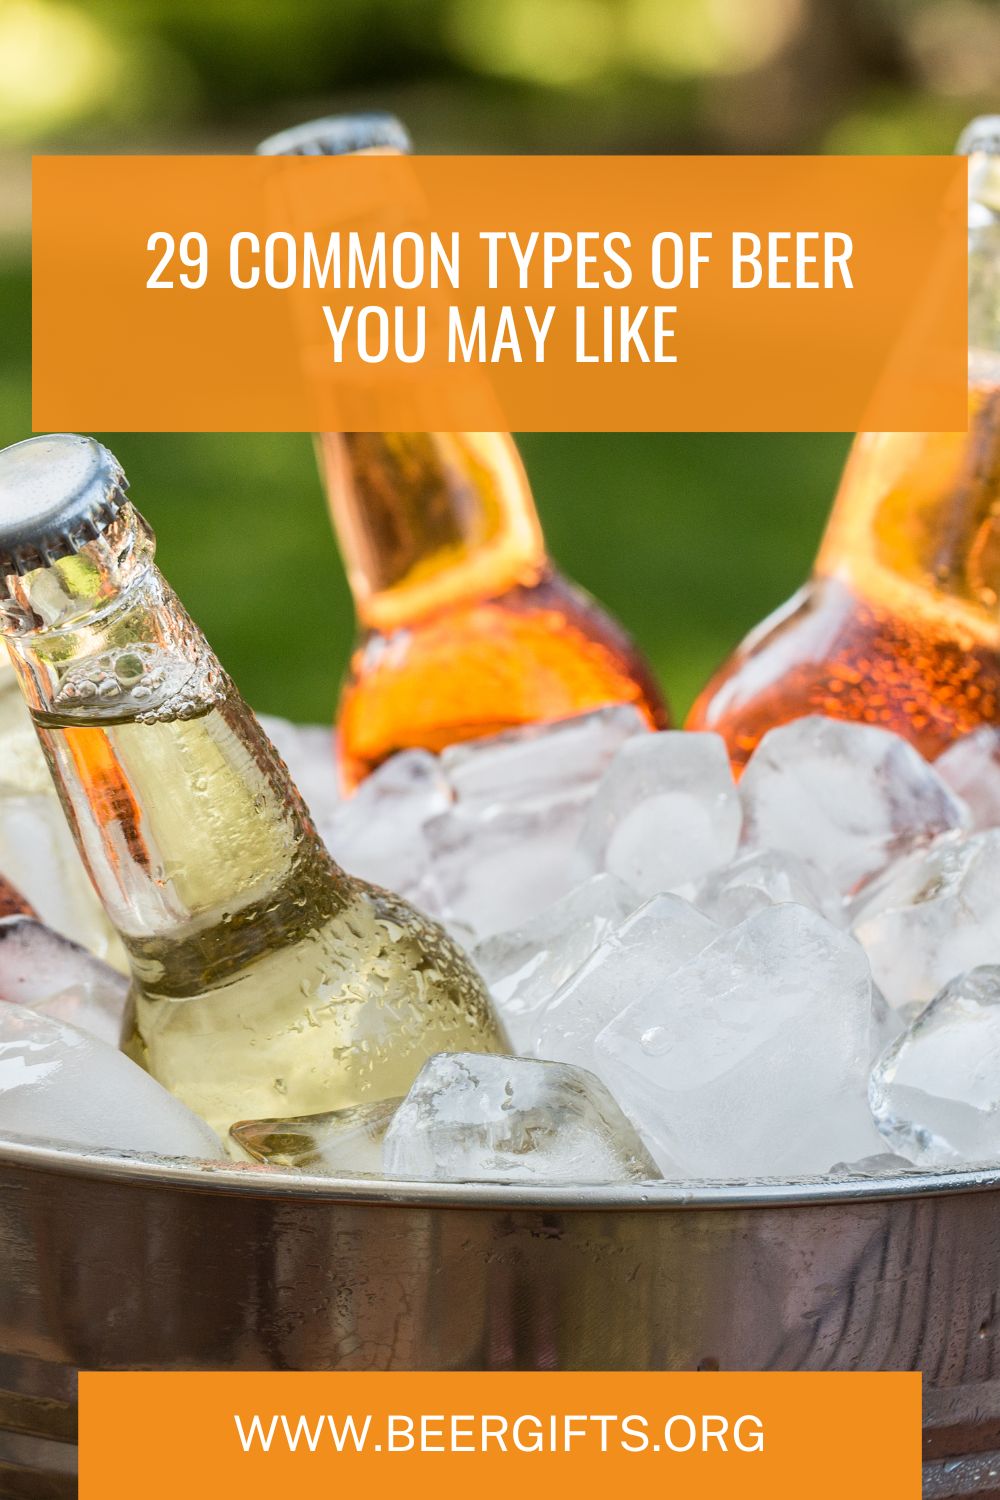 29 Common Types of Beer You May Like31